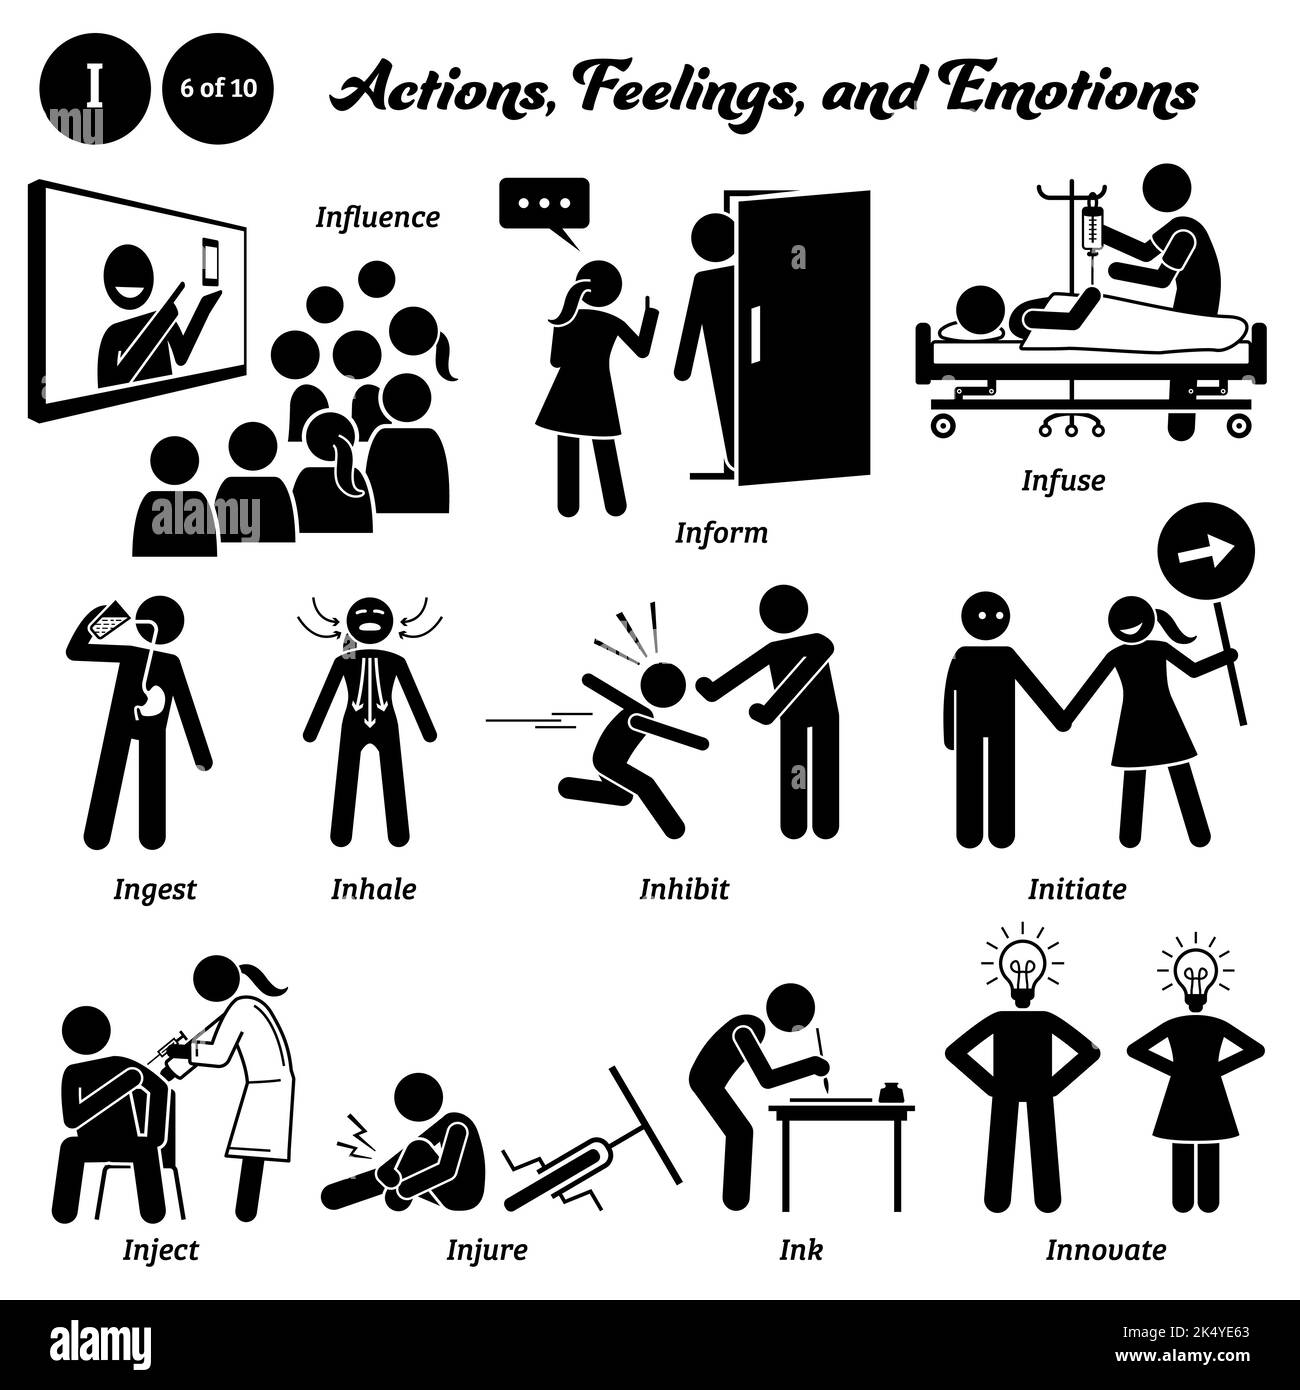 Stick figure human people man action, feelings, and emotions icons alphabet I. Influence, inform, infuse, ingest, inhale, inhibit, initiate, inject, i Stock Vector